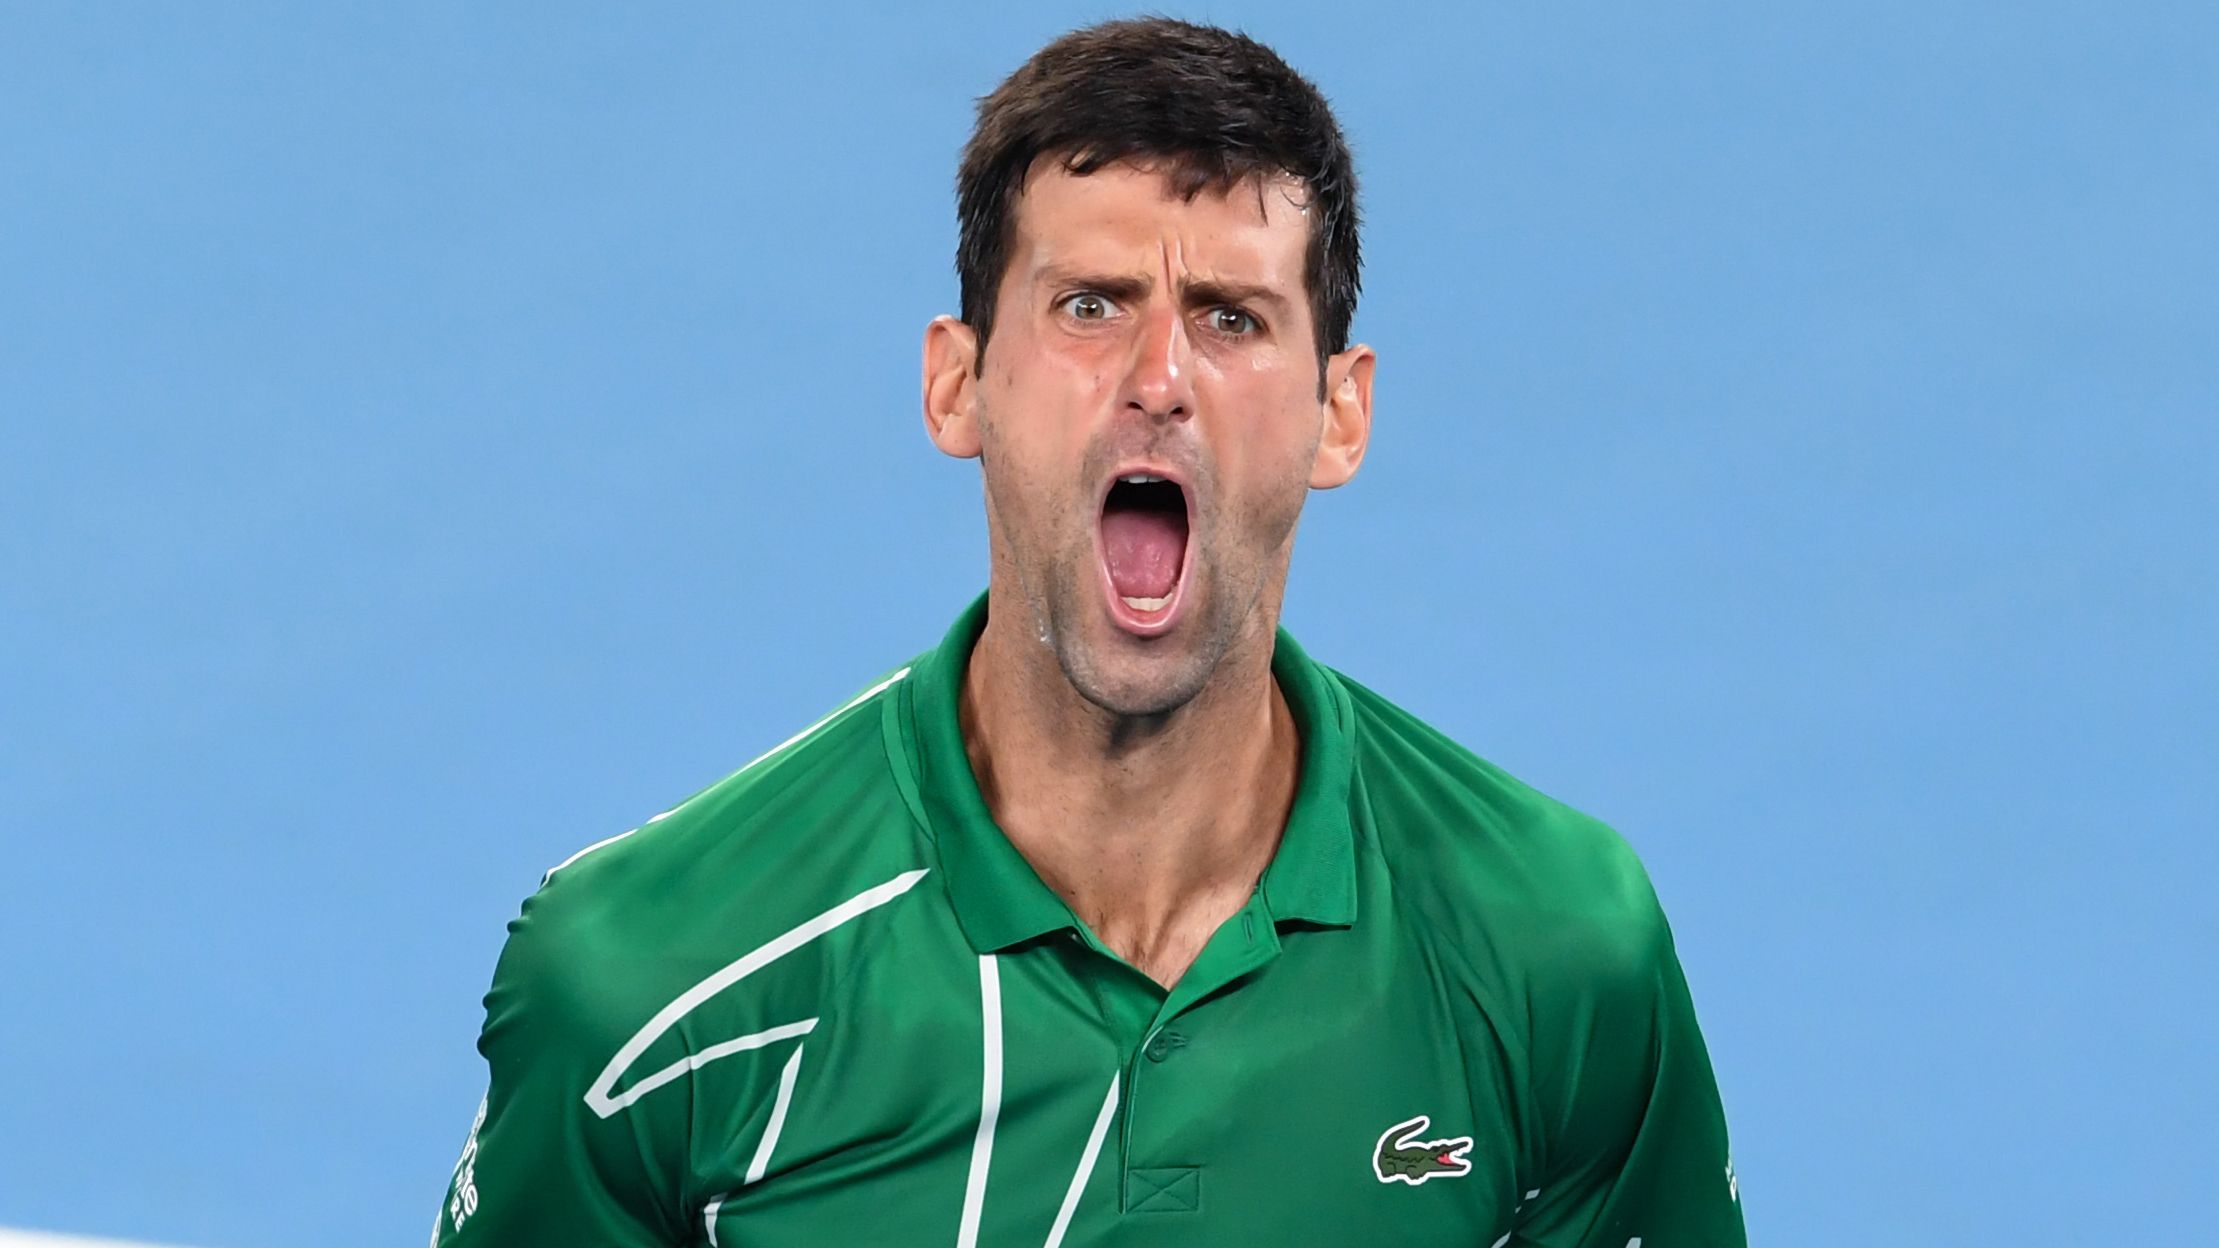 Why Novak Djokovic is respected but not loved and it still gets to him